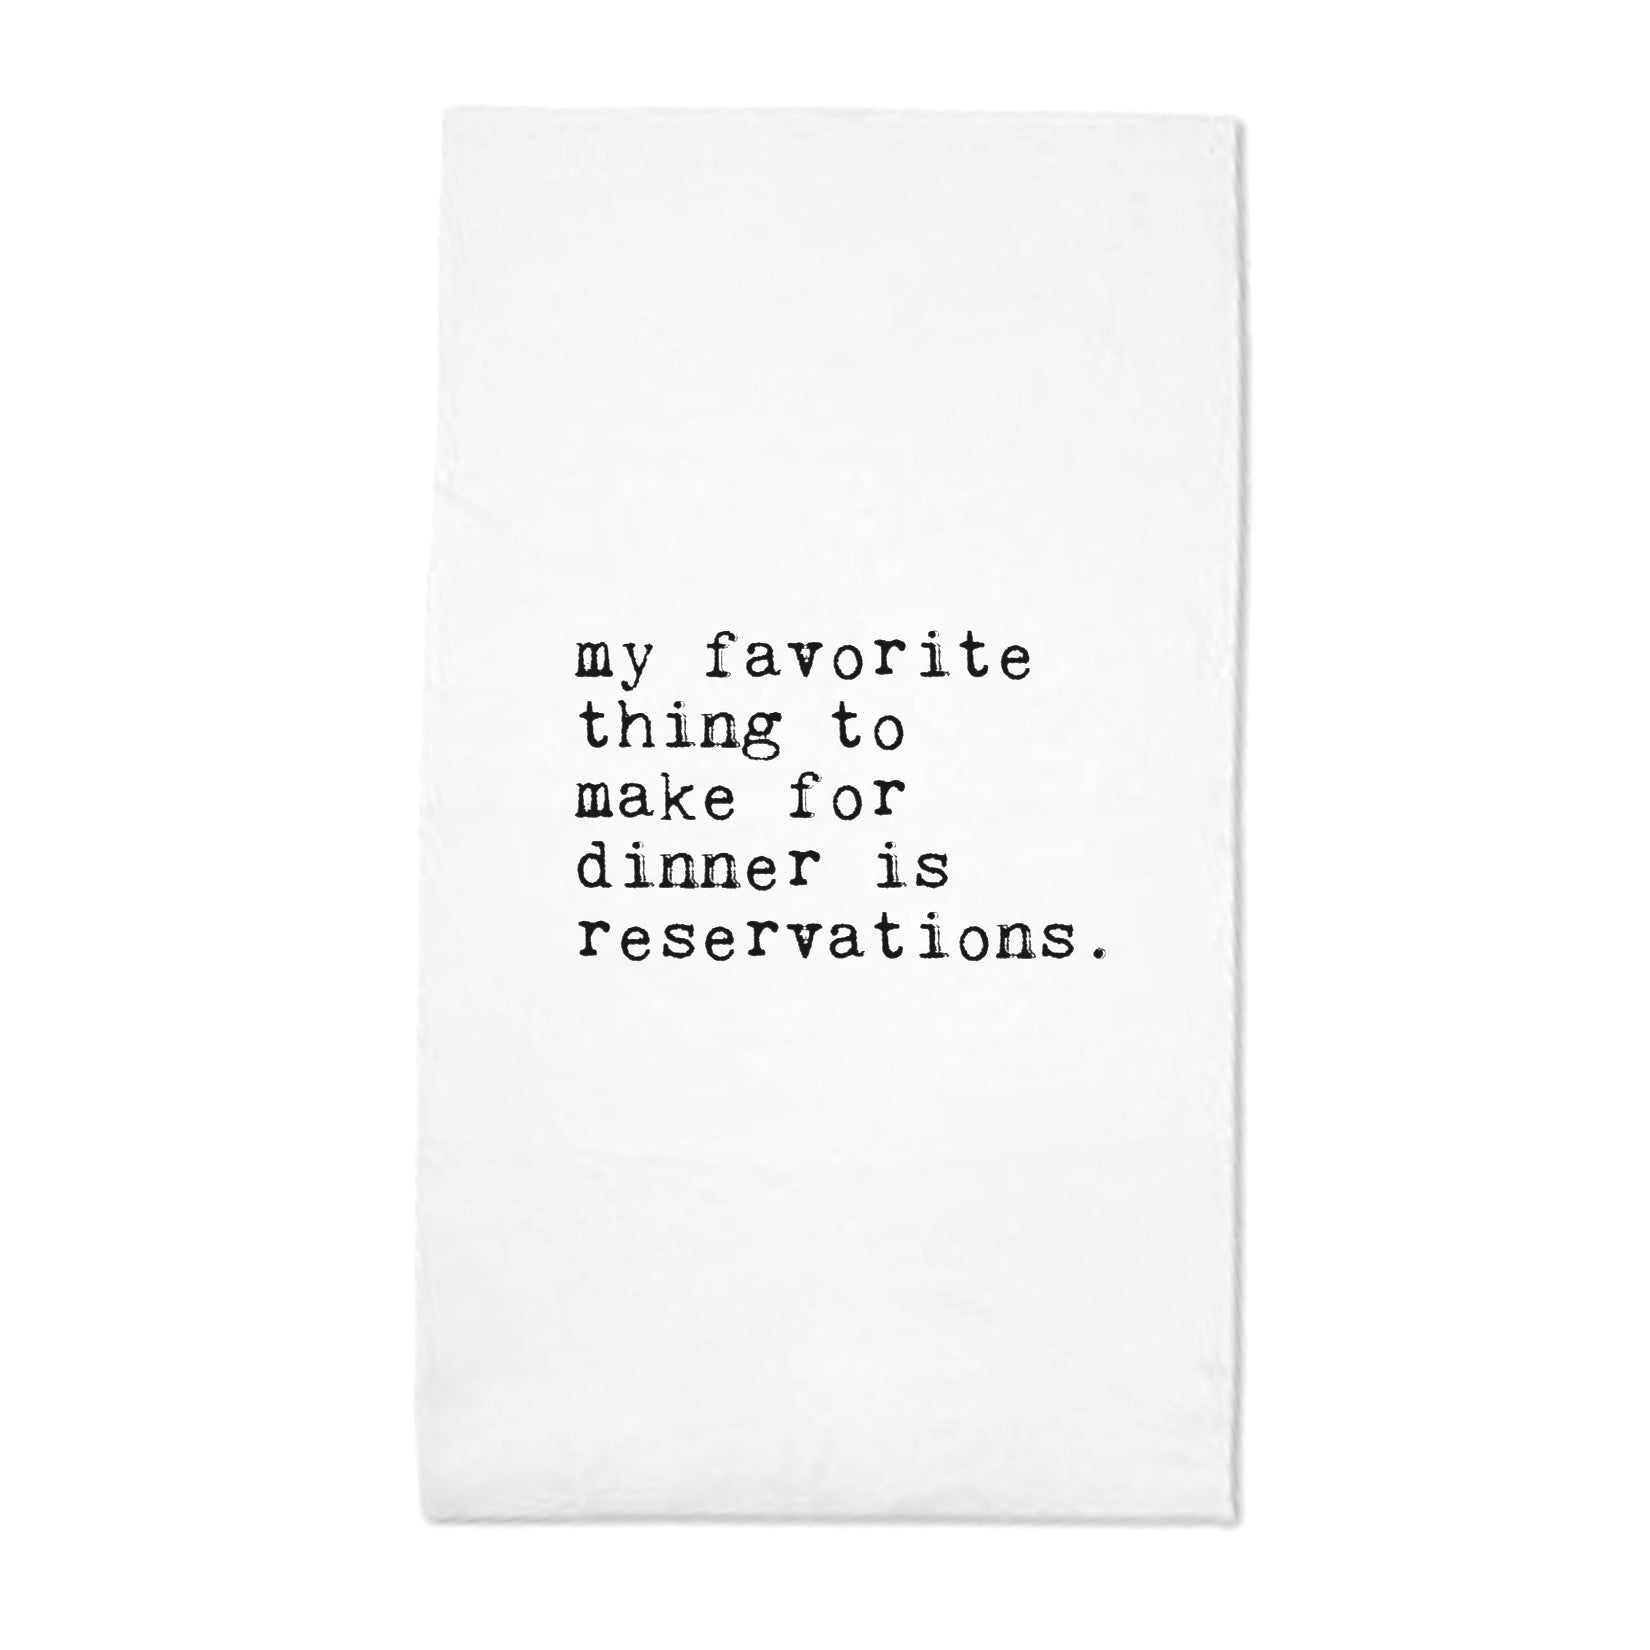 Let's Eat Lunch and Talk About Dinner Tea Towel